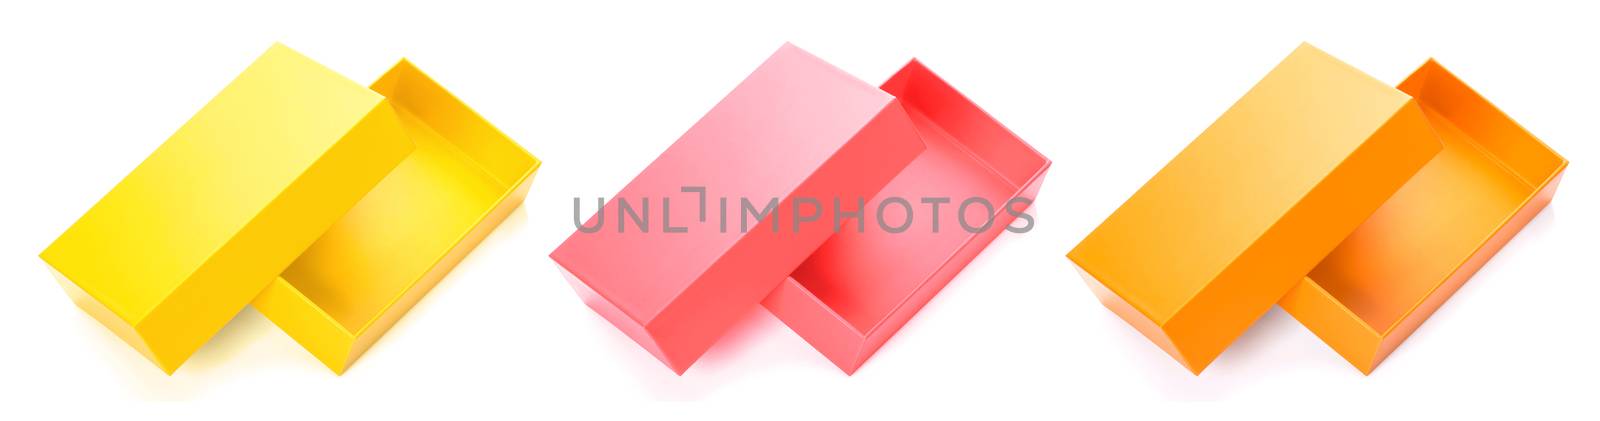 Color cardboard box mock up isolated on white background. Collection